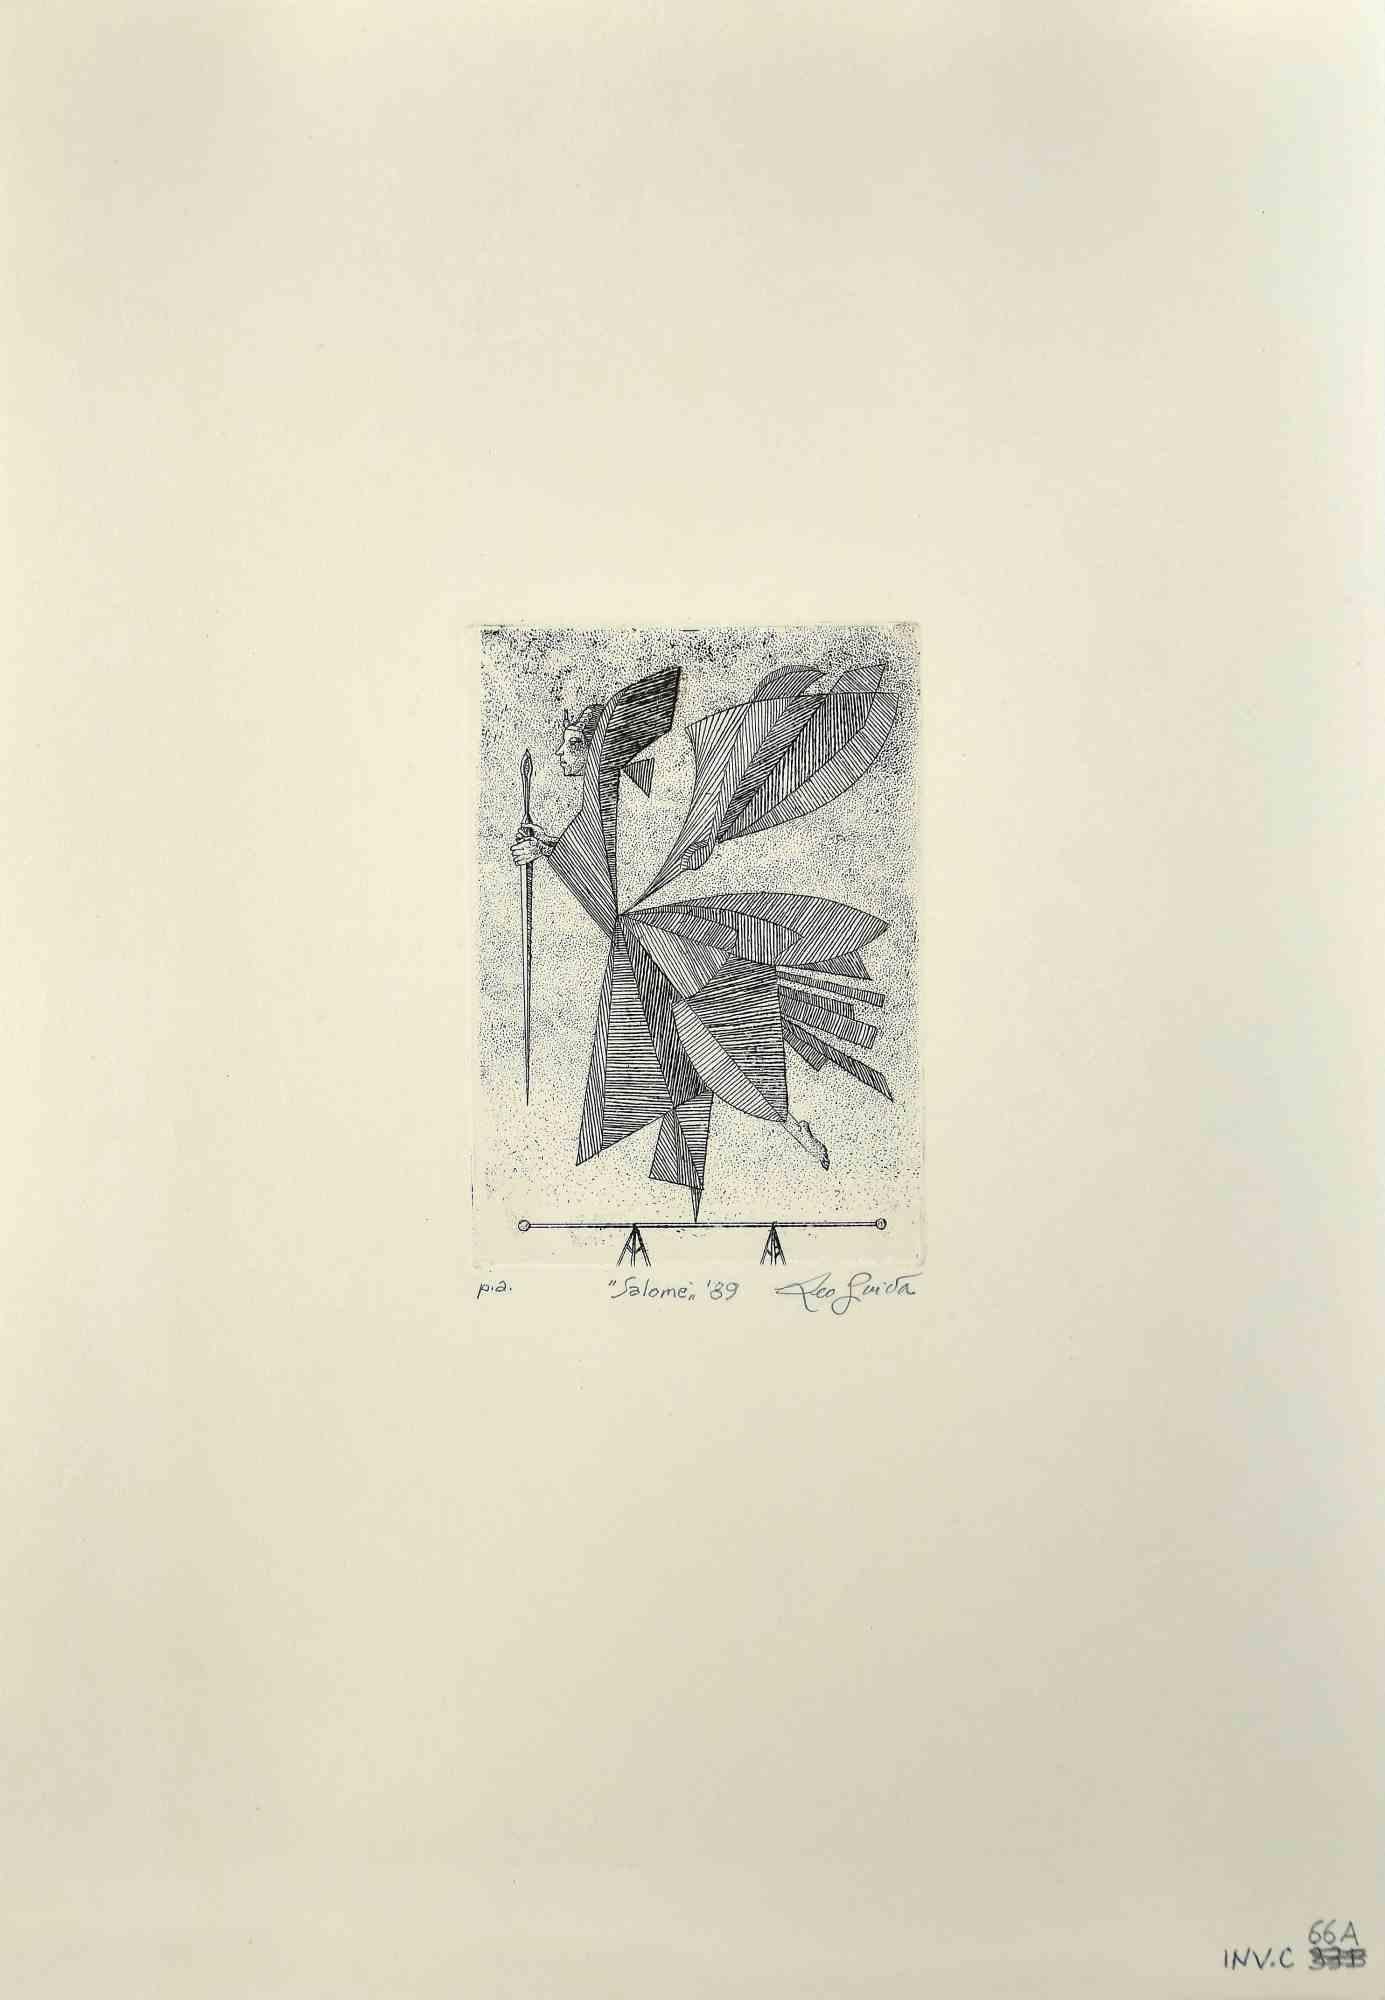 Salomè is an original etching and aquatint realized by Leo Guida in 1989.

Guter Zustand.

Mounted on a white cardboard passpartout (50x35).

Dated and signed by the author.

Artist proof.

Leo Guida  (1992 - 2017). Sensitive to current issues,